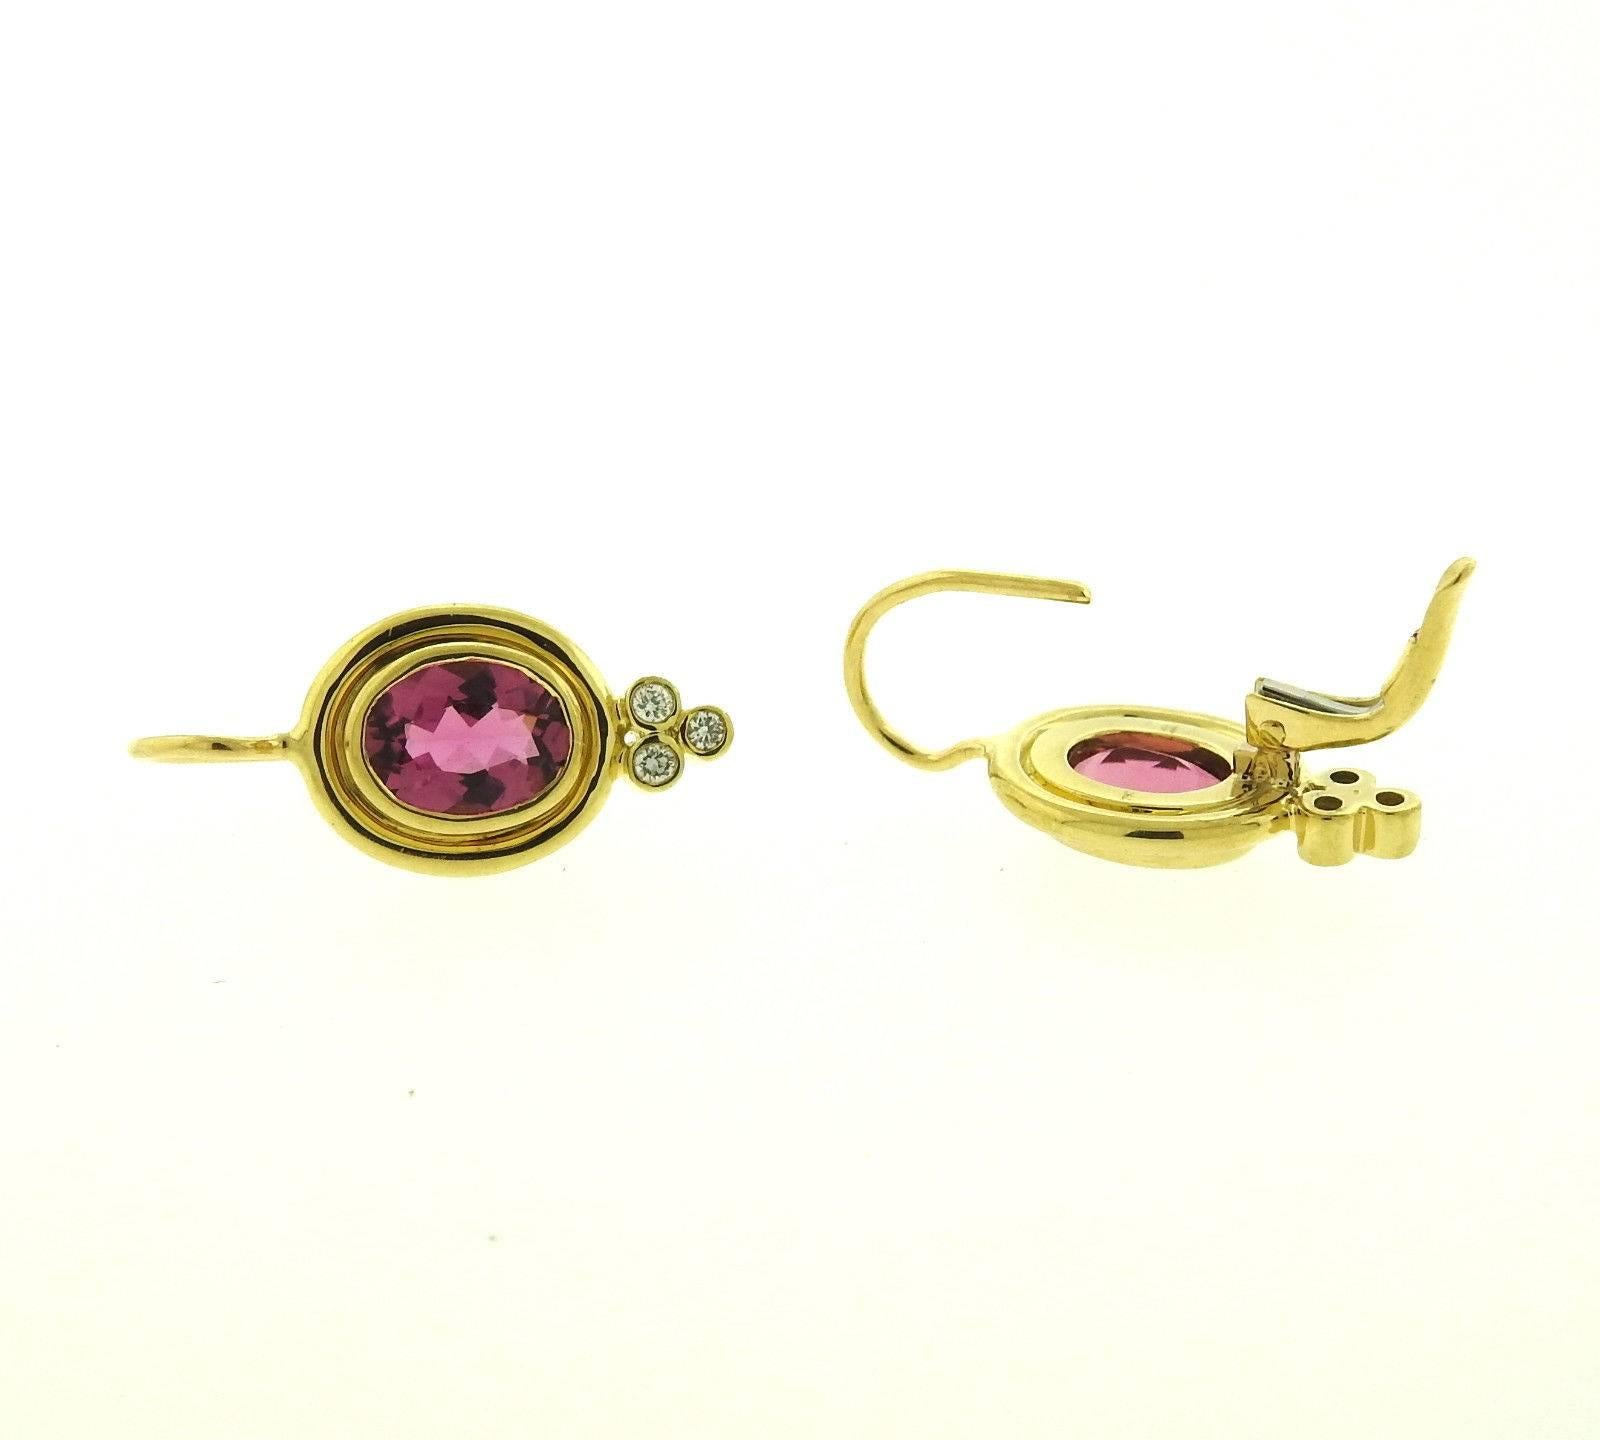 A pair of 18k yellow gold earrings set with pink tourmalines and approximately 0.09ctw of G/VS diamonds.  The earrings are 23mm x 10mm and weigh 5.3 grams.  Marked: Temple Hallmark, 750. The retail is $2950.